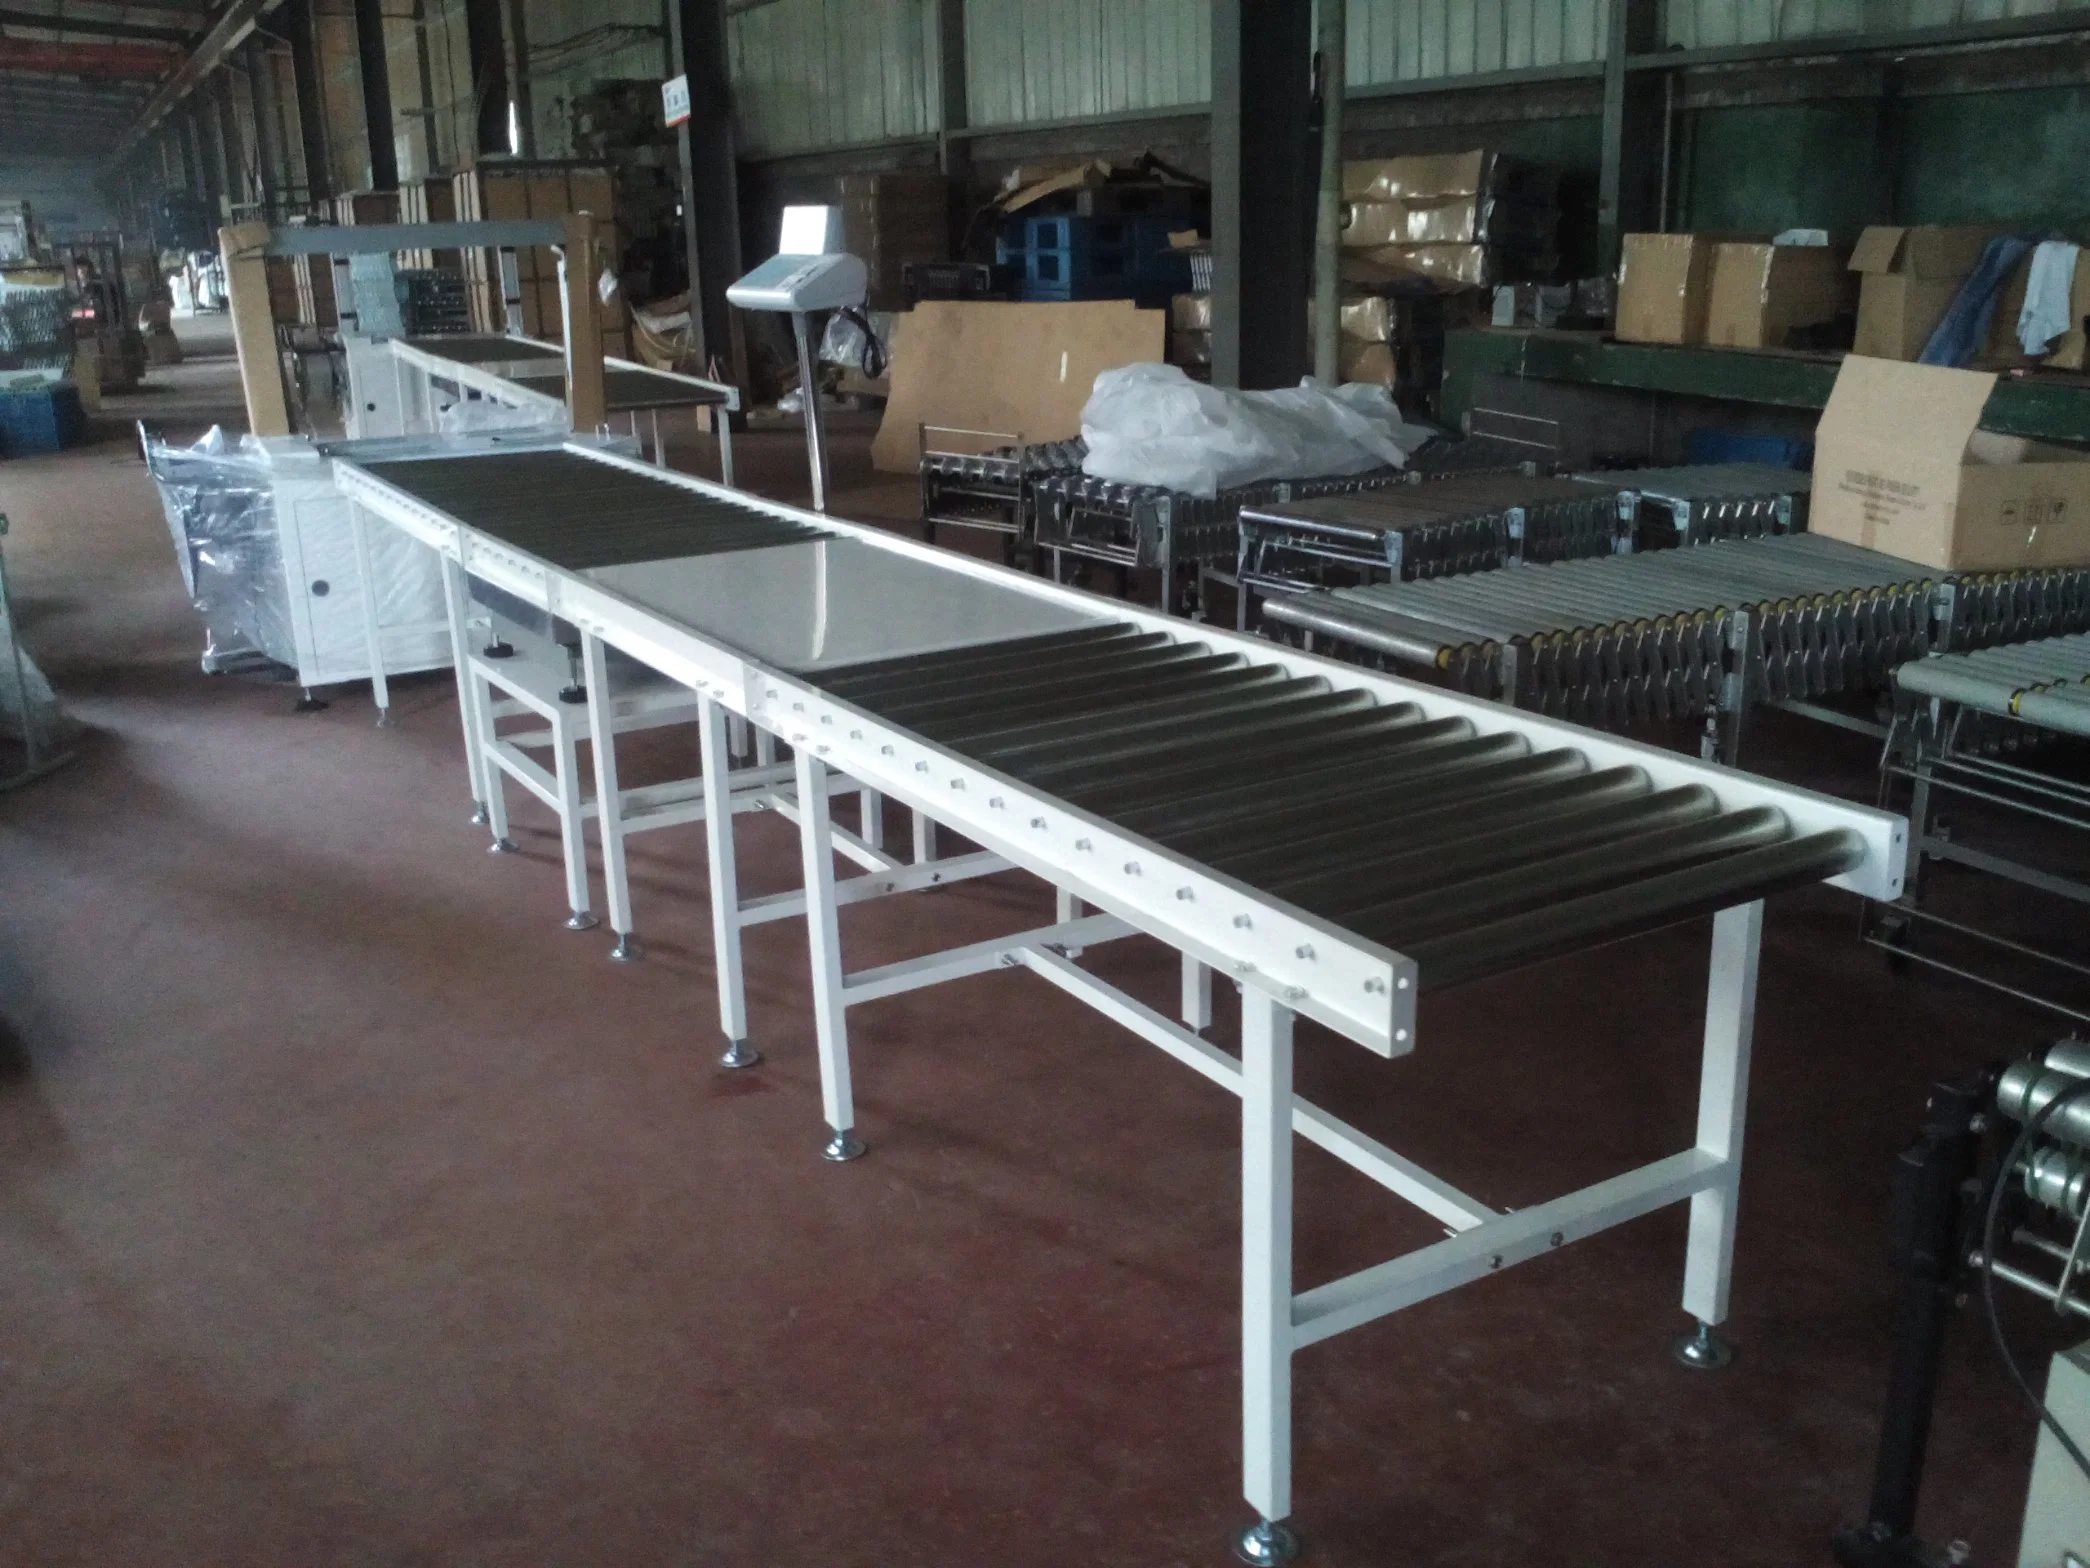 Semi-Automatic Packing Line Roller Conveyor System with Weighing Unit